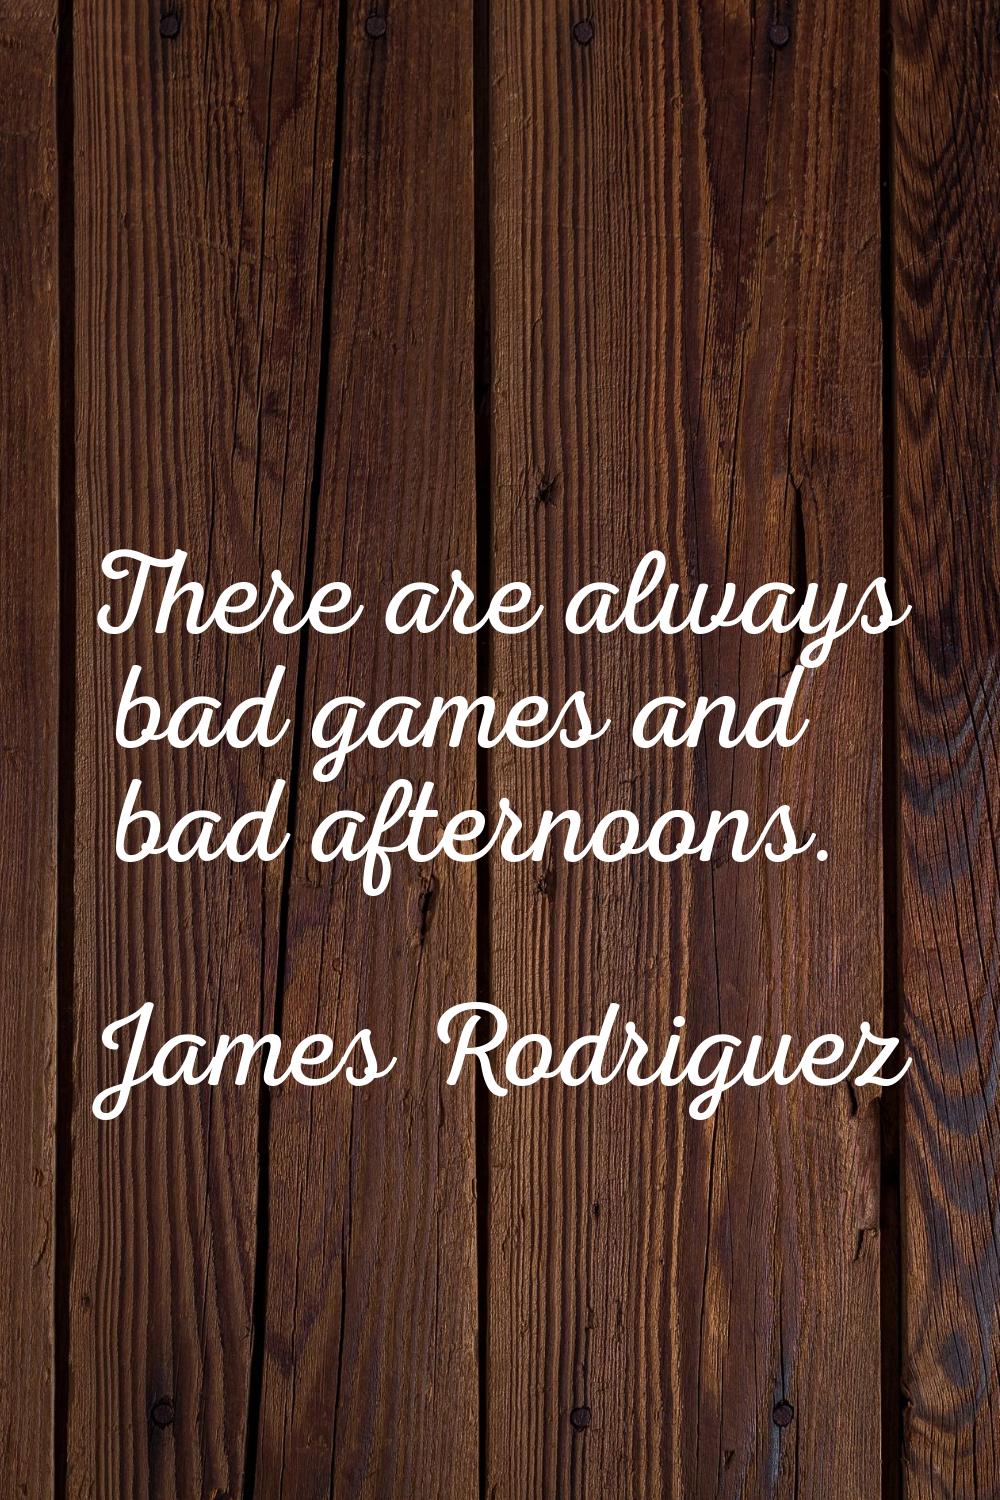 There are always bad games and bad afternoons.